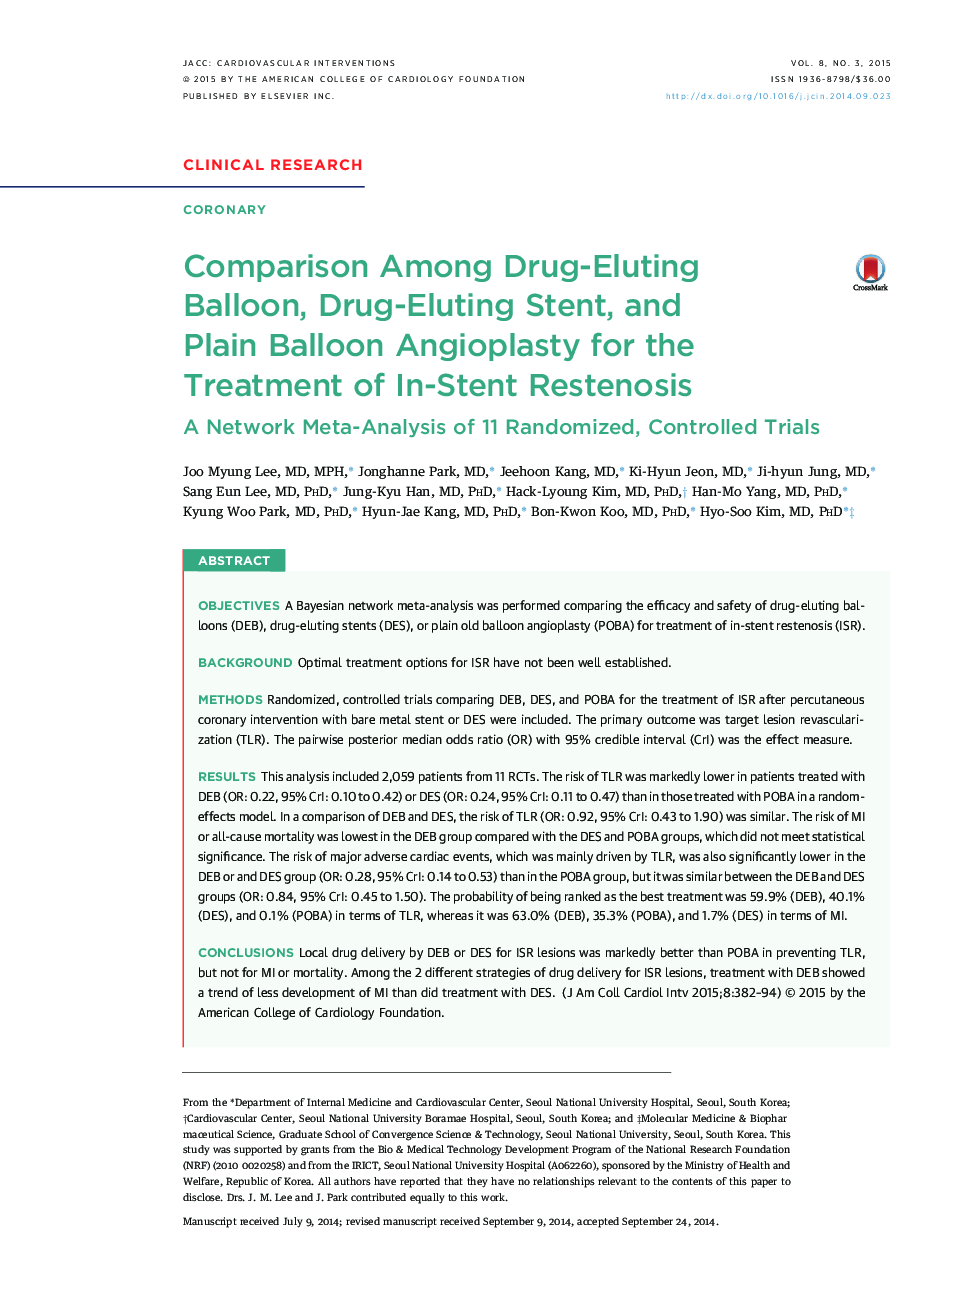 Comparison Among Drug-Eluting Balloon, Drug-Eluting Stent, and PlainÂ Balloon Angioplasty for the Treatment of In-Stent Restenosis: A Network Meta-Analysis of 11 Randomized, Controlled Trials